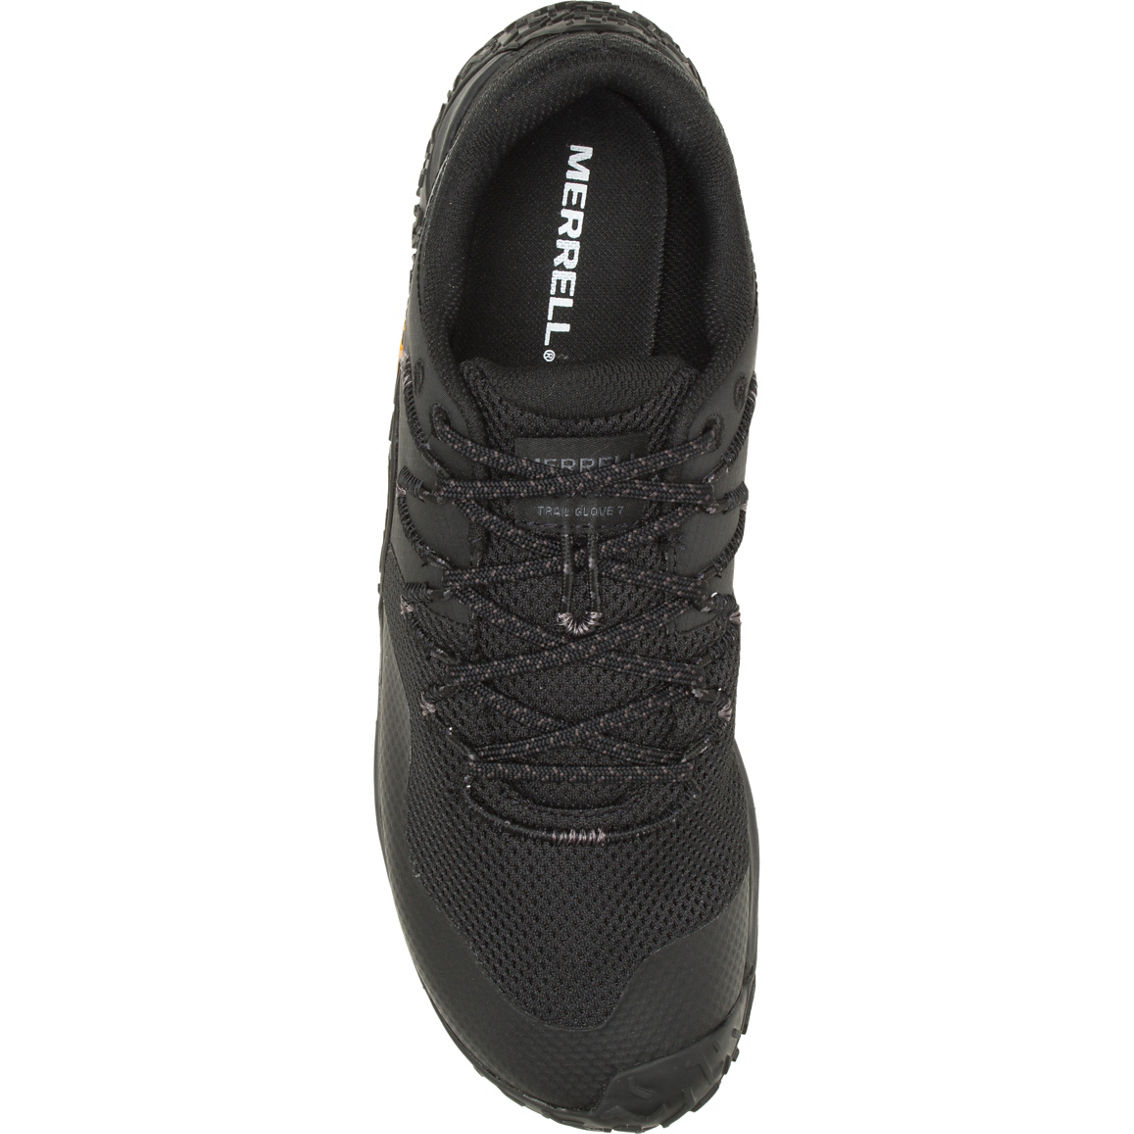 Merrell Men's Trail Glove 7 Shoes - Image 5 of 6